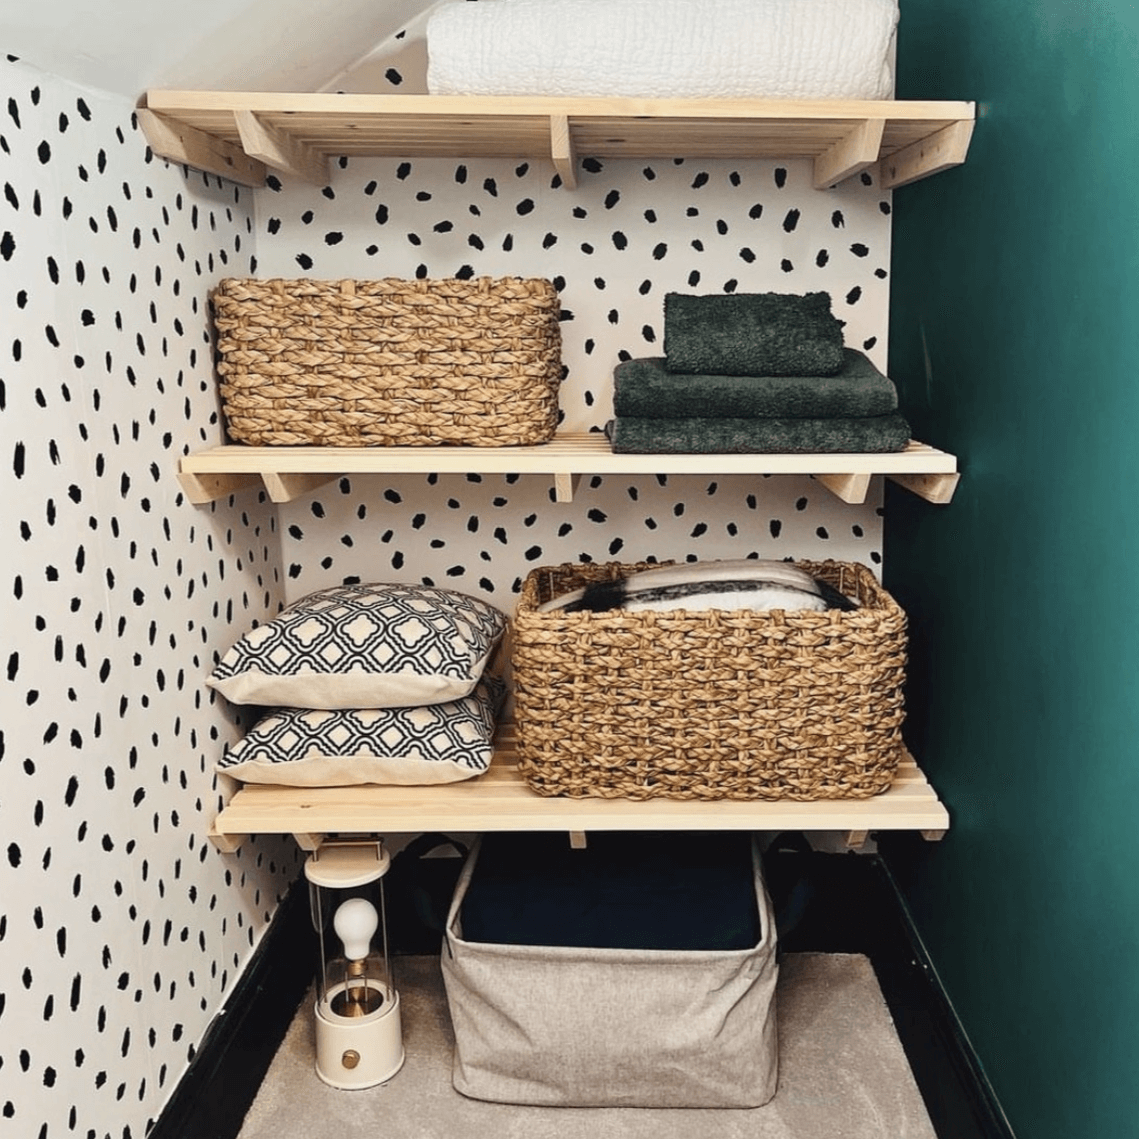 Airing Cupboard Wooden Slatted Shelves - 94 cm by 55 cm